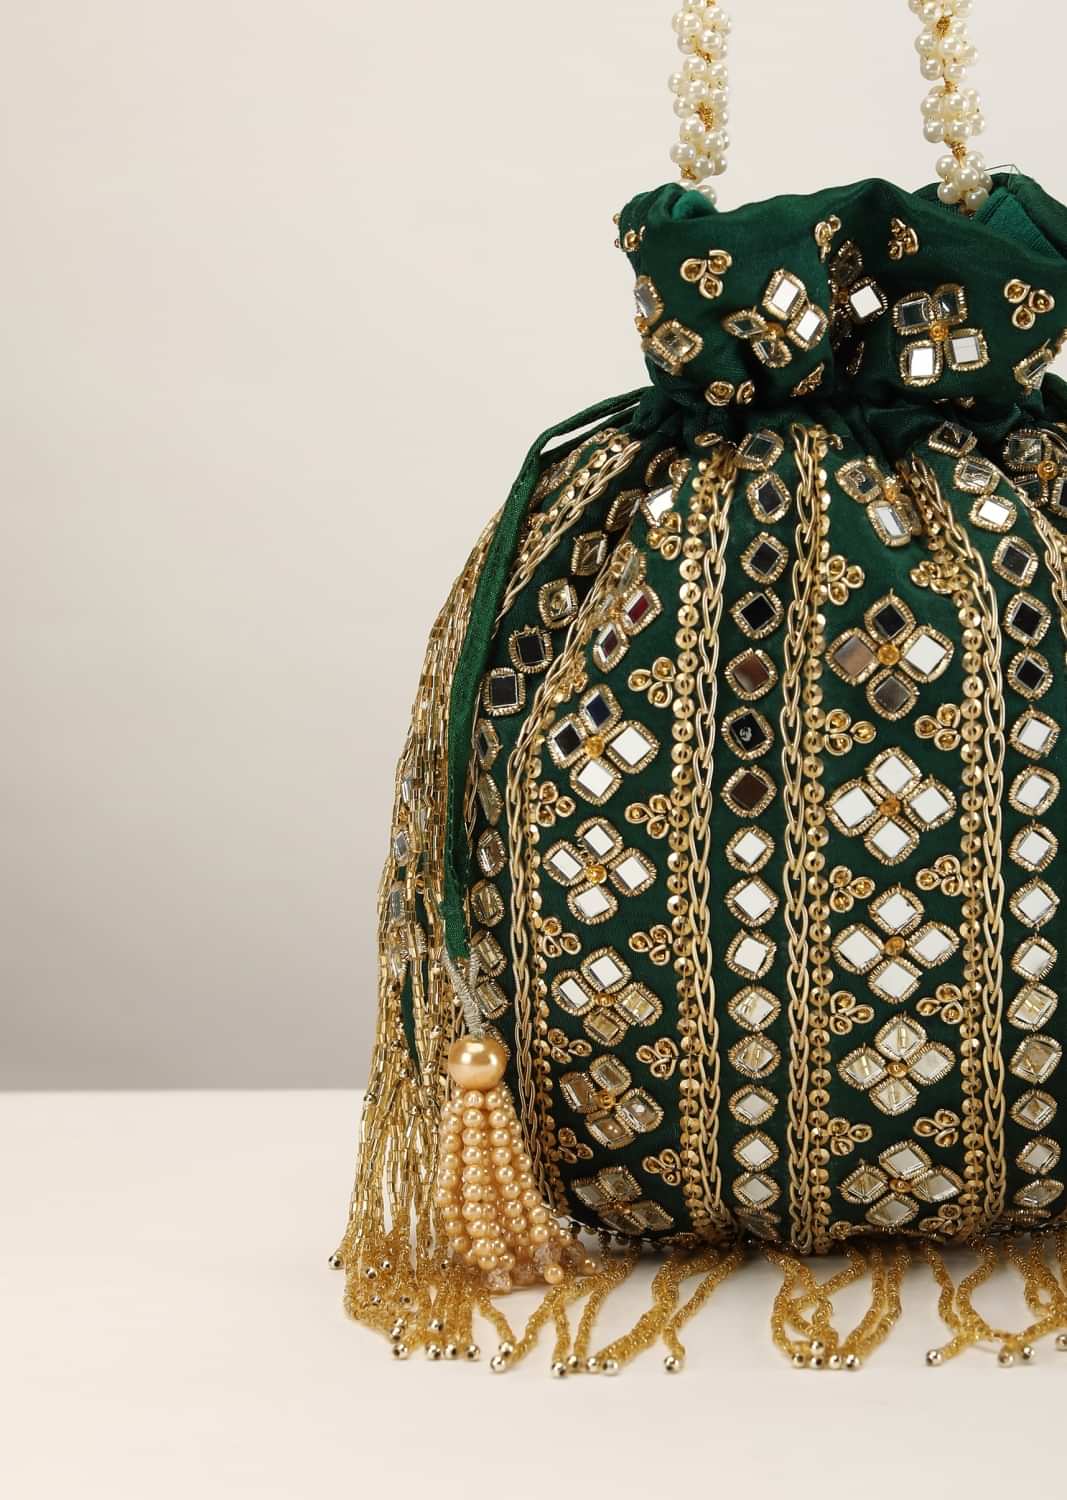 Emerald Green Potli In Satin With Hand Embroidery Detailing Using Mirror And Cut Dana Fringes